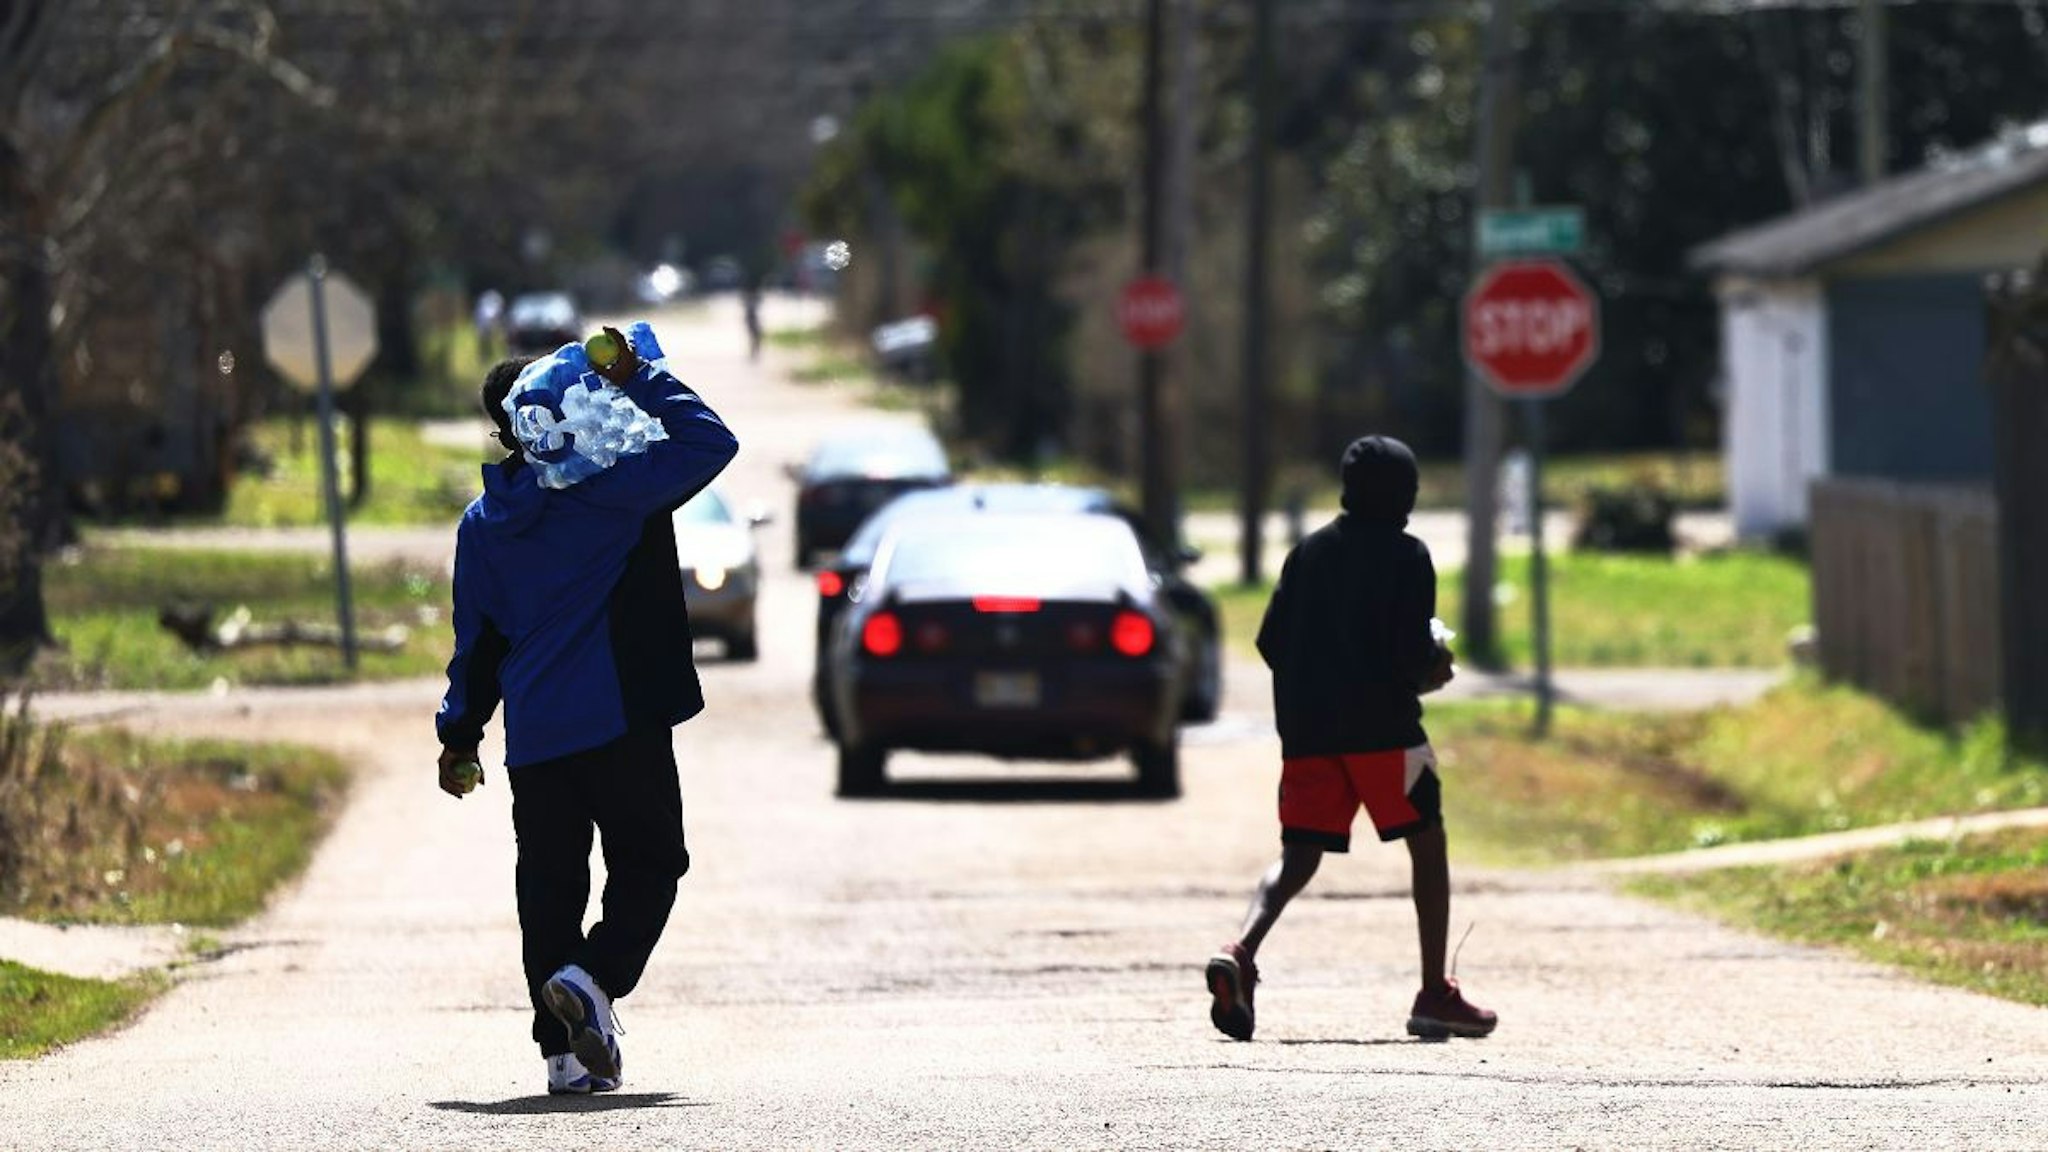 A man carries a case of water after receiving it at a water and food distribution drive held by College Hill Baptist Church and the World Central kitchen on March 07, 2021 in Jackson, Mississippi.